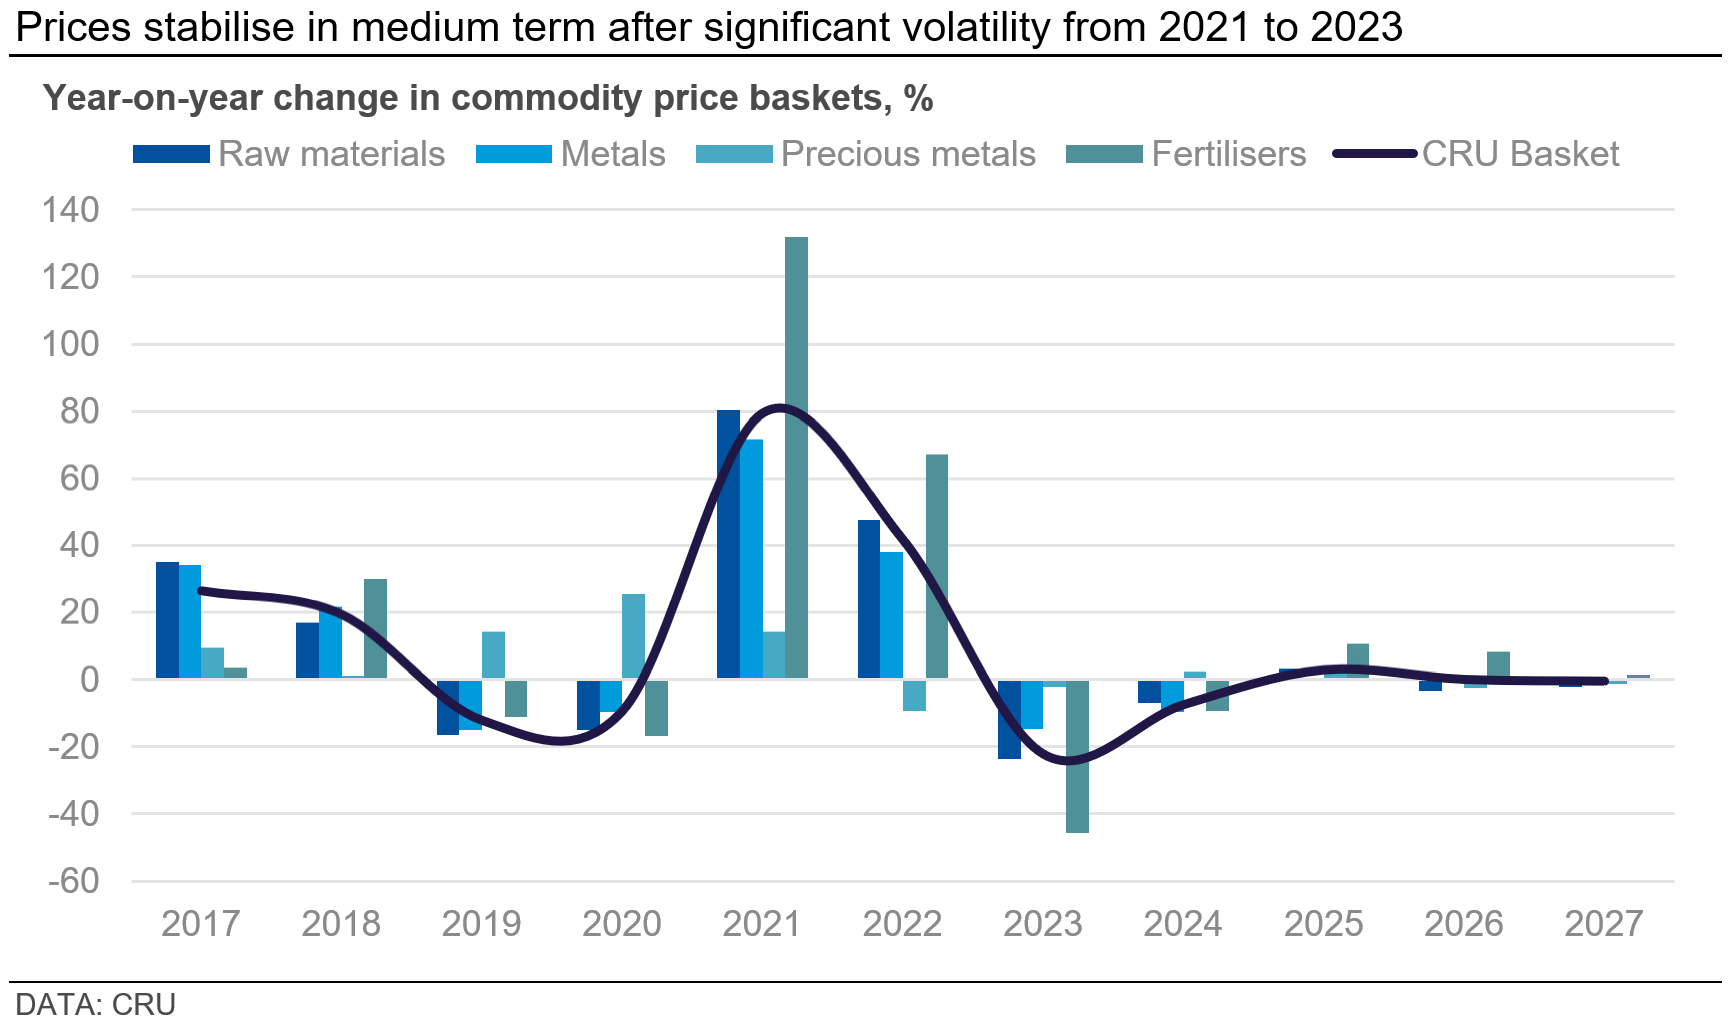 Graph showing that prices stabilise in medium term after significant volatility from 2021 to 2023